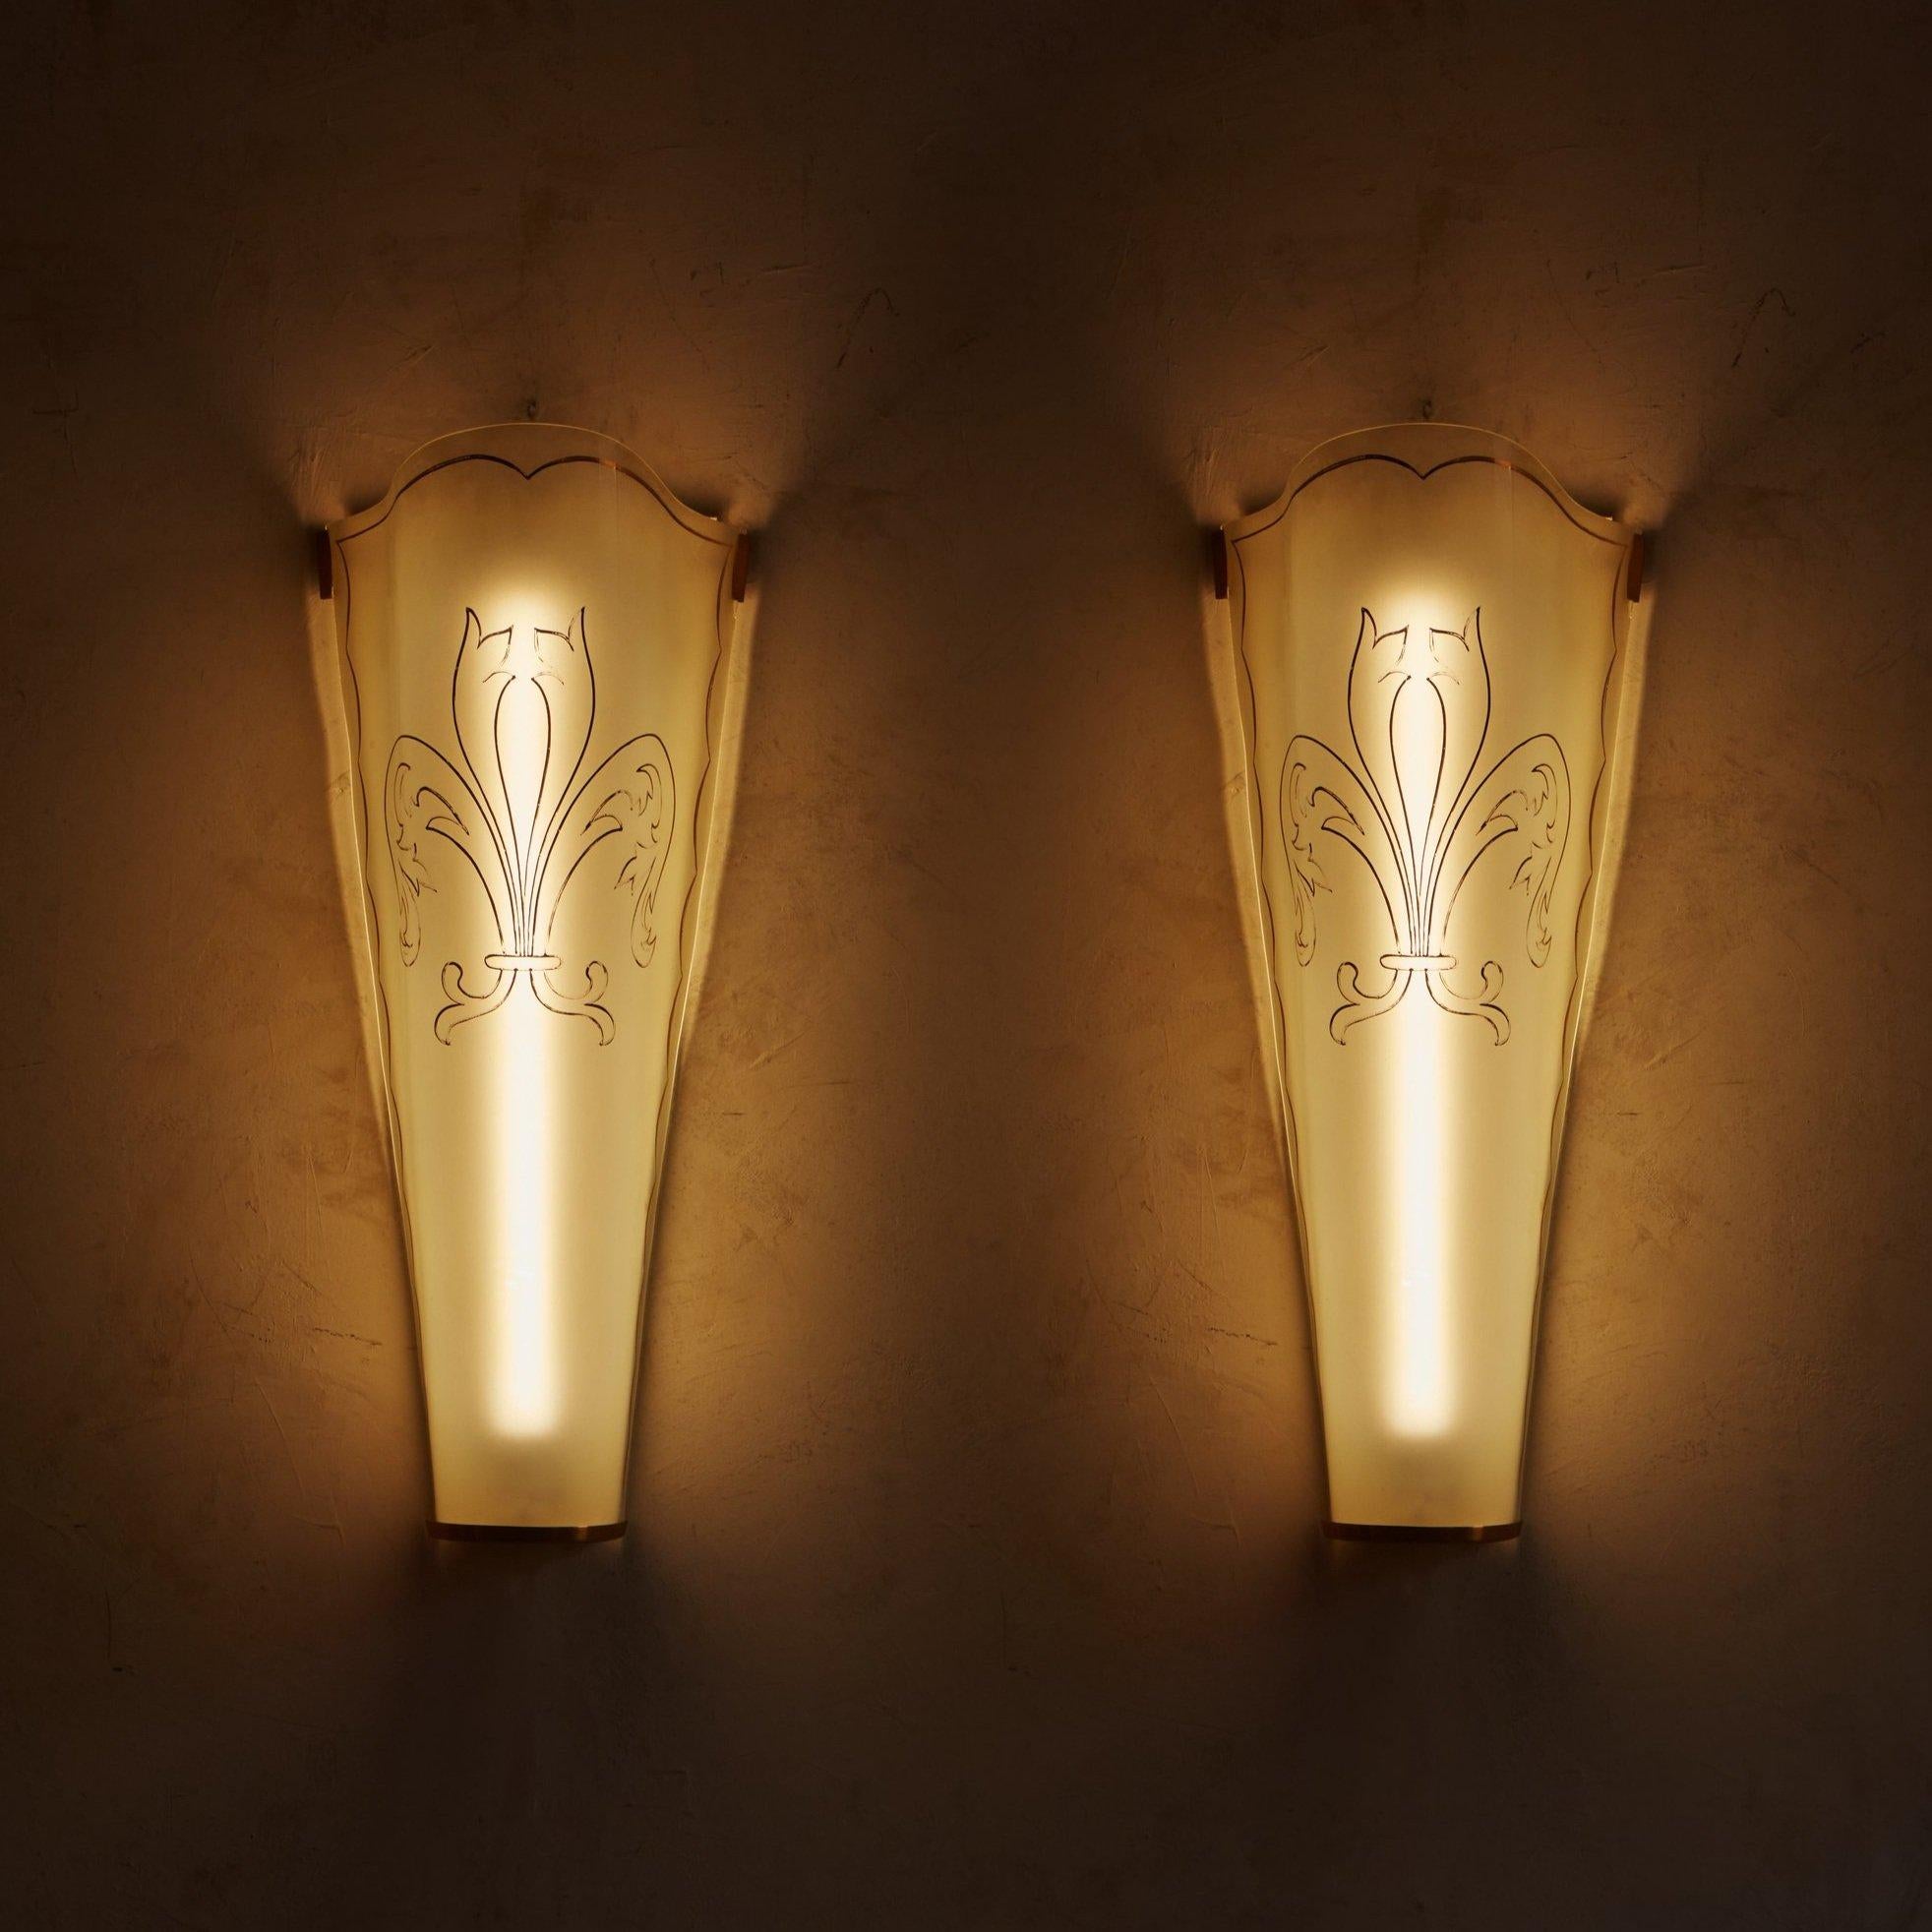 A pair of 1930s French sconces featuring tall, curved glass shades with a demilune brass base and hardware. Each shade has an elegant scalloped trim and overlaid gold pattern, which becomes beautifully backlit when these sconces are turned on.